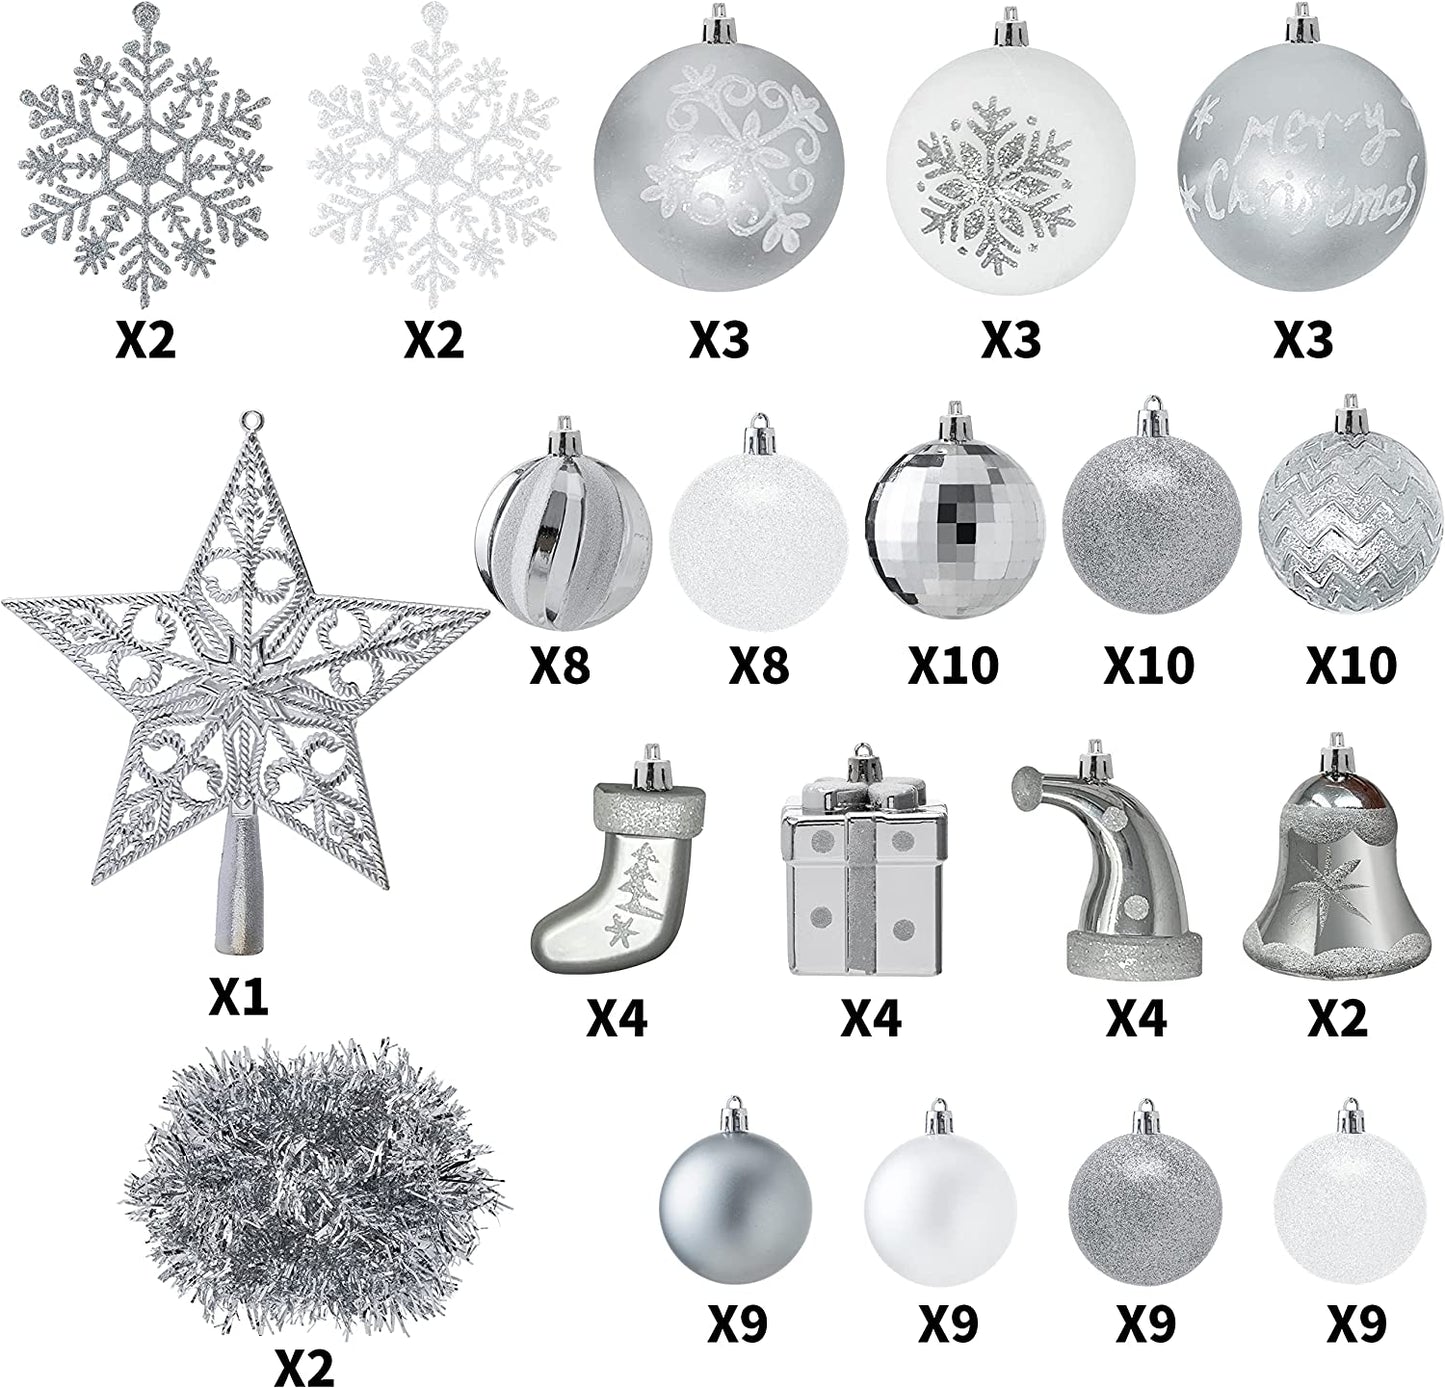 112 Pcs Silver & White Christmas Assorted Ornaments with a Star Tree Topper